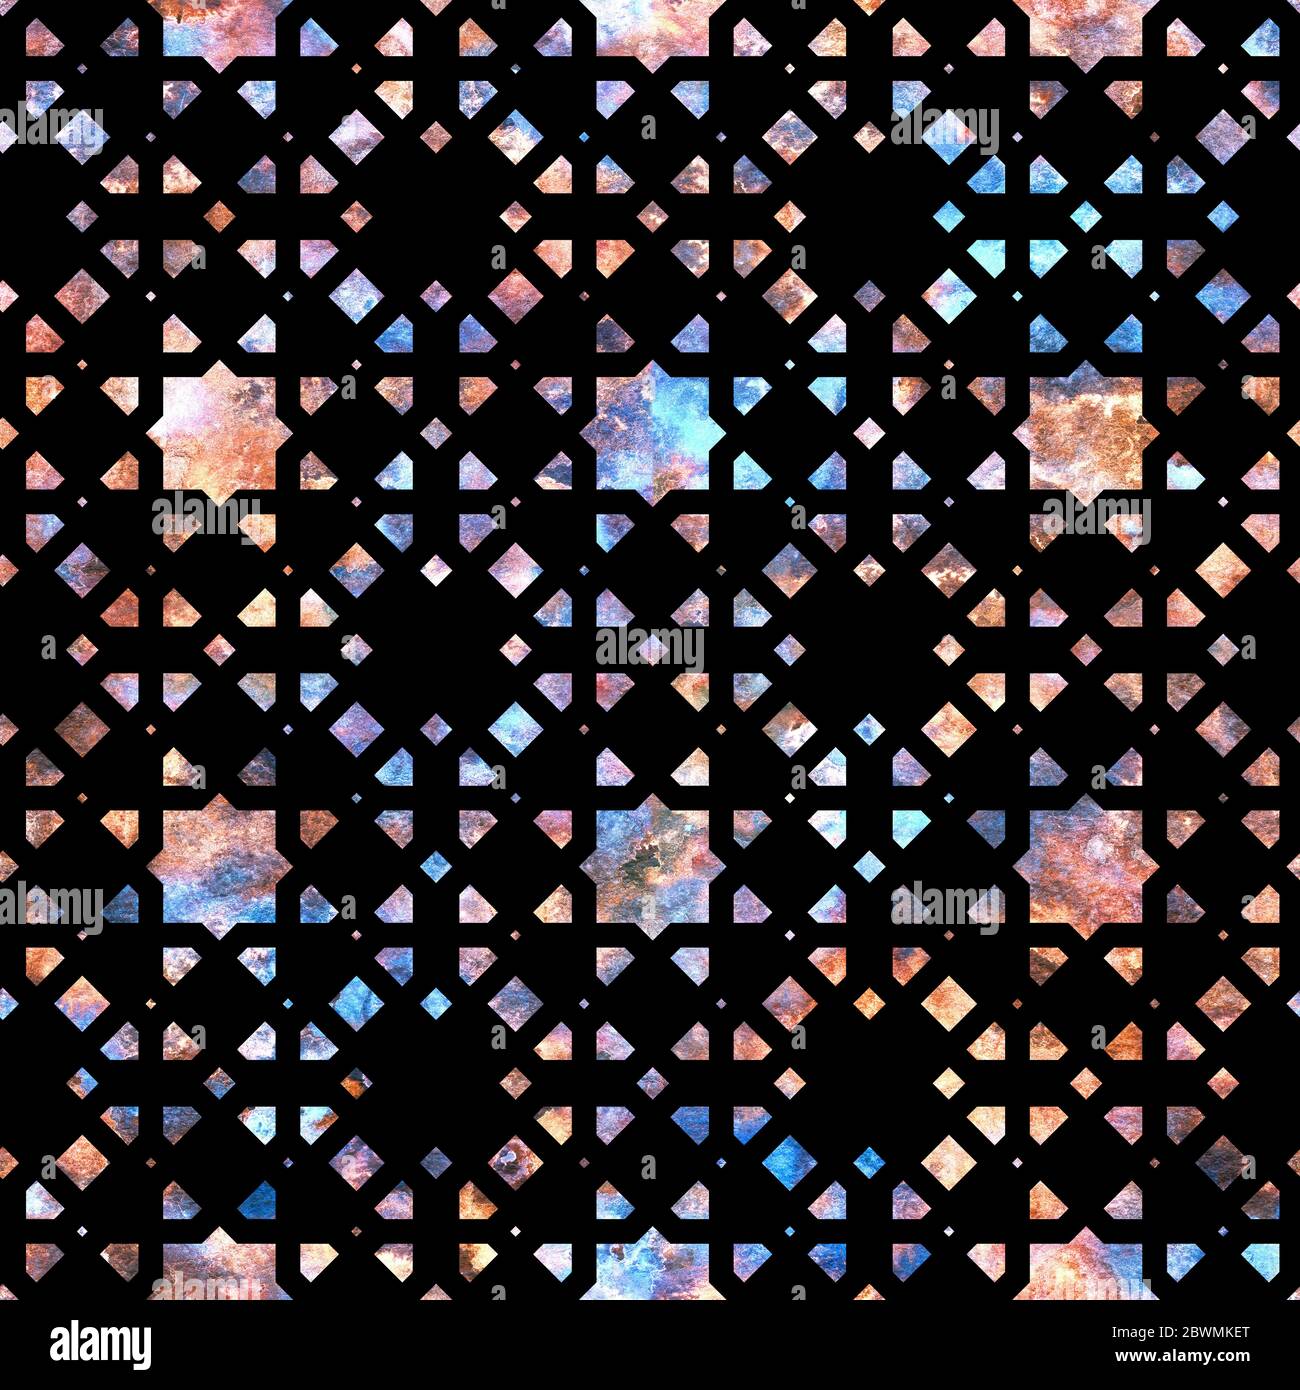 Jewelry, gem, precious stone pattern, texture, mosaic on a black background in arabesque style. Seamless colorful jewel pattern with melange texture Stock Photo